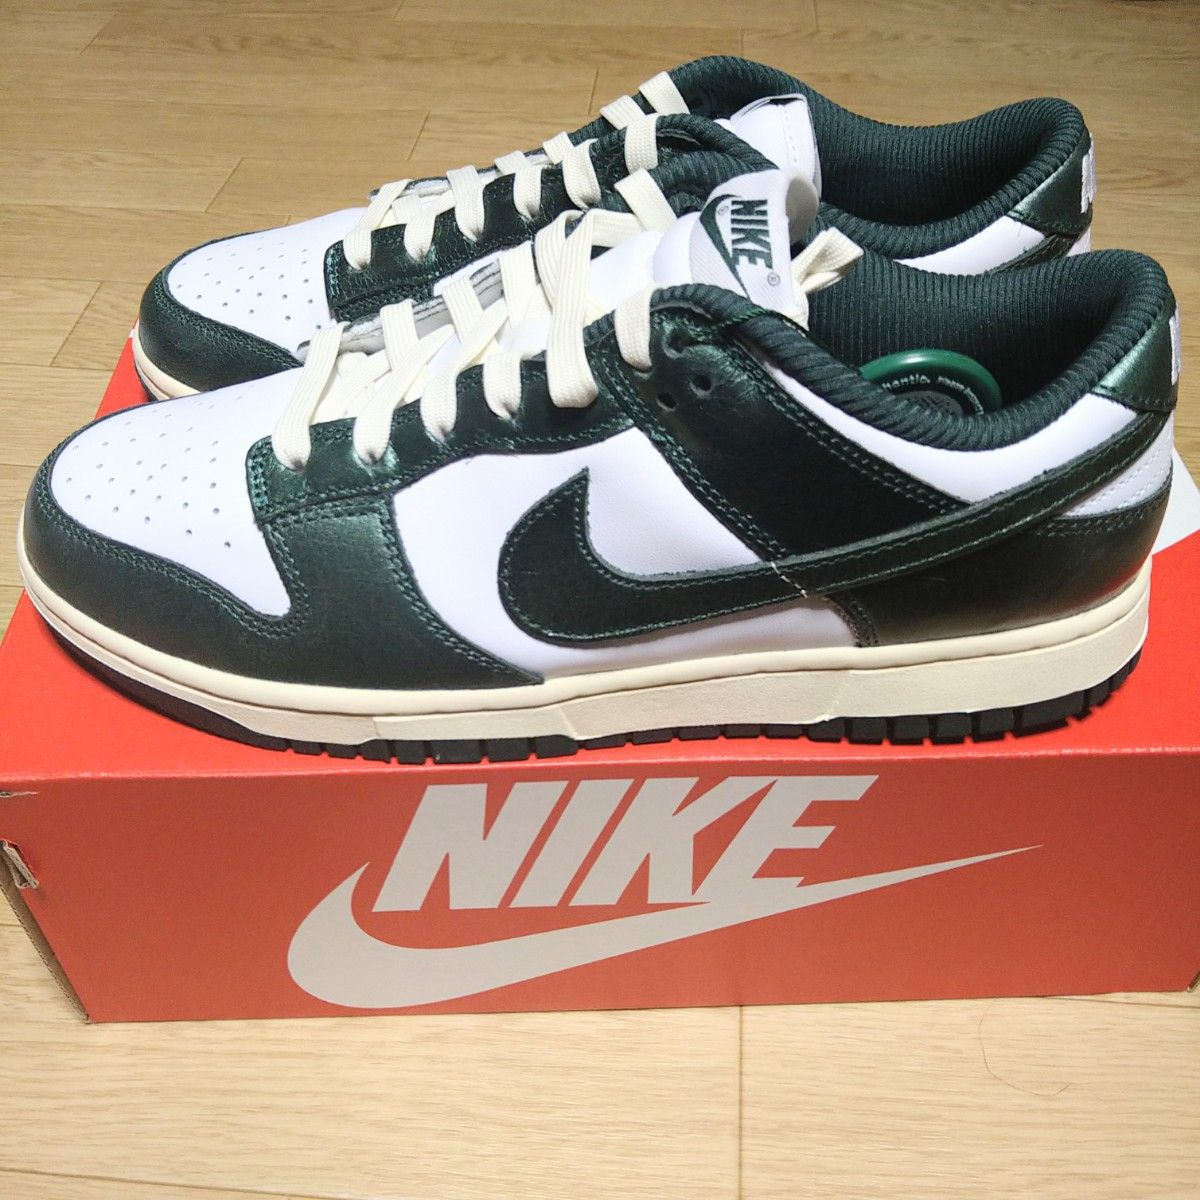 Nike WMNS Dunk Low Vintage Green ナイキ ウィメンズ ダンク ロー ヴィンテージグリーン 27cm